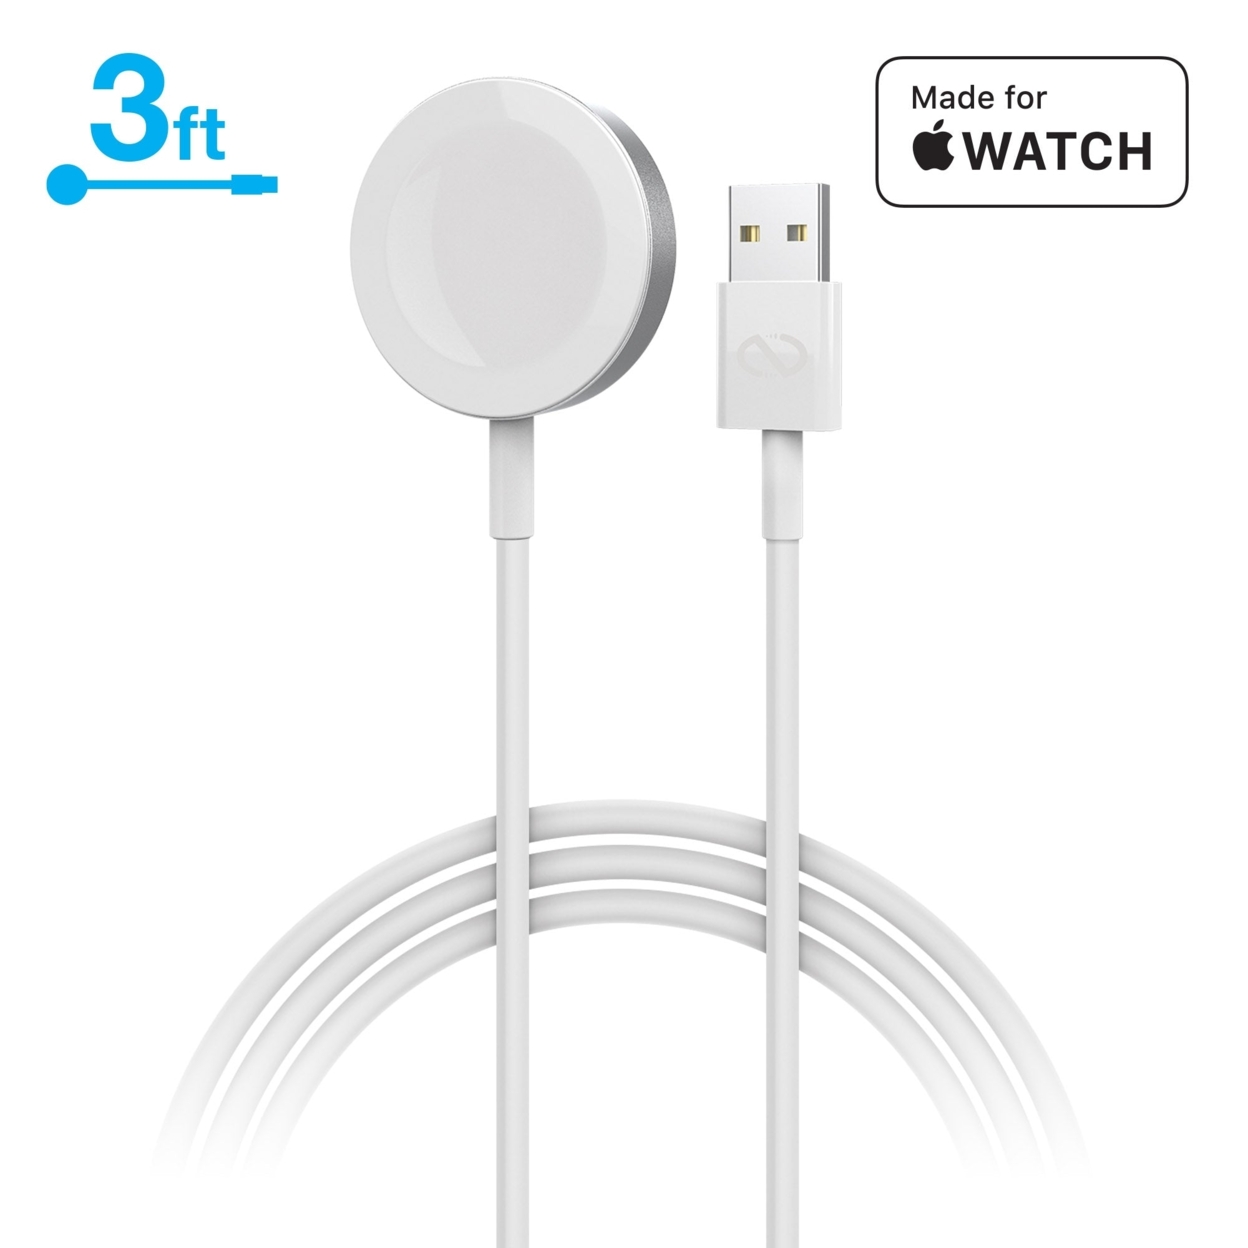 Naztech Magnetic Charging Cable For Apple Watch 3ft (15599-HYP)